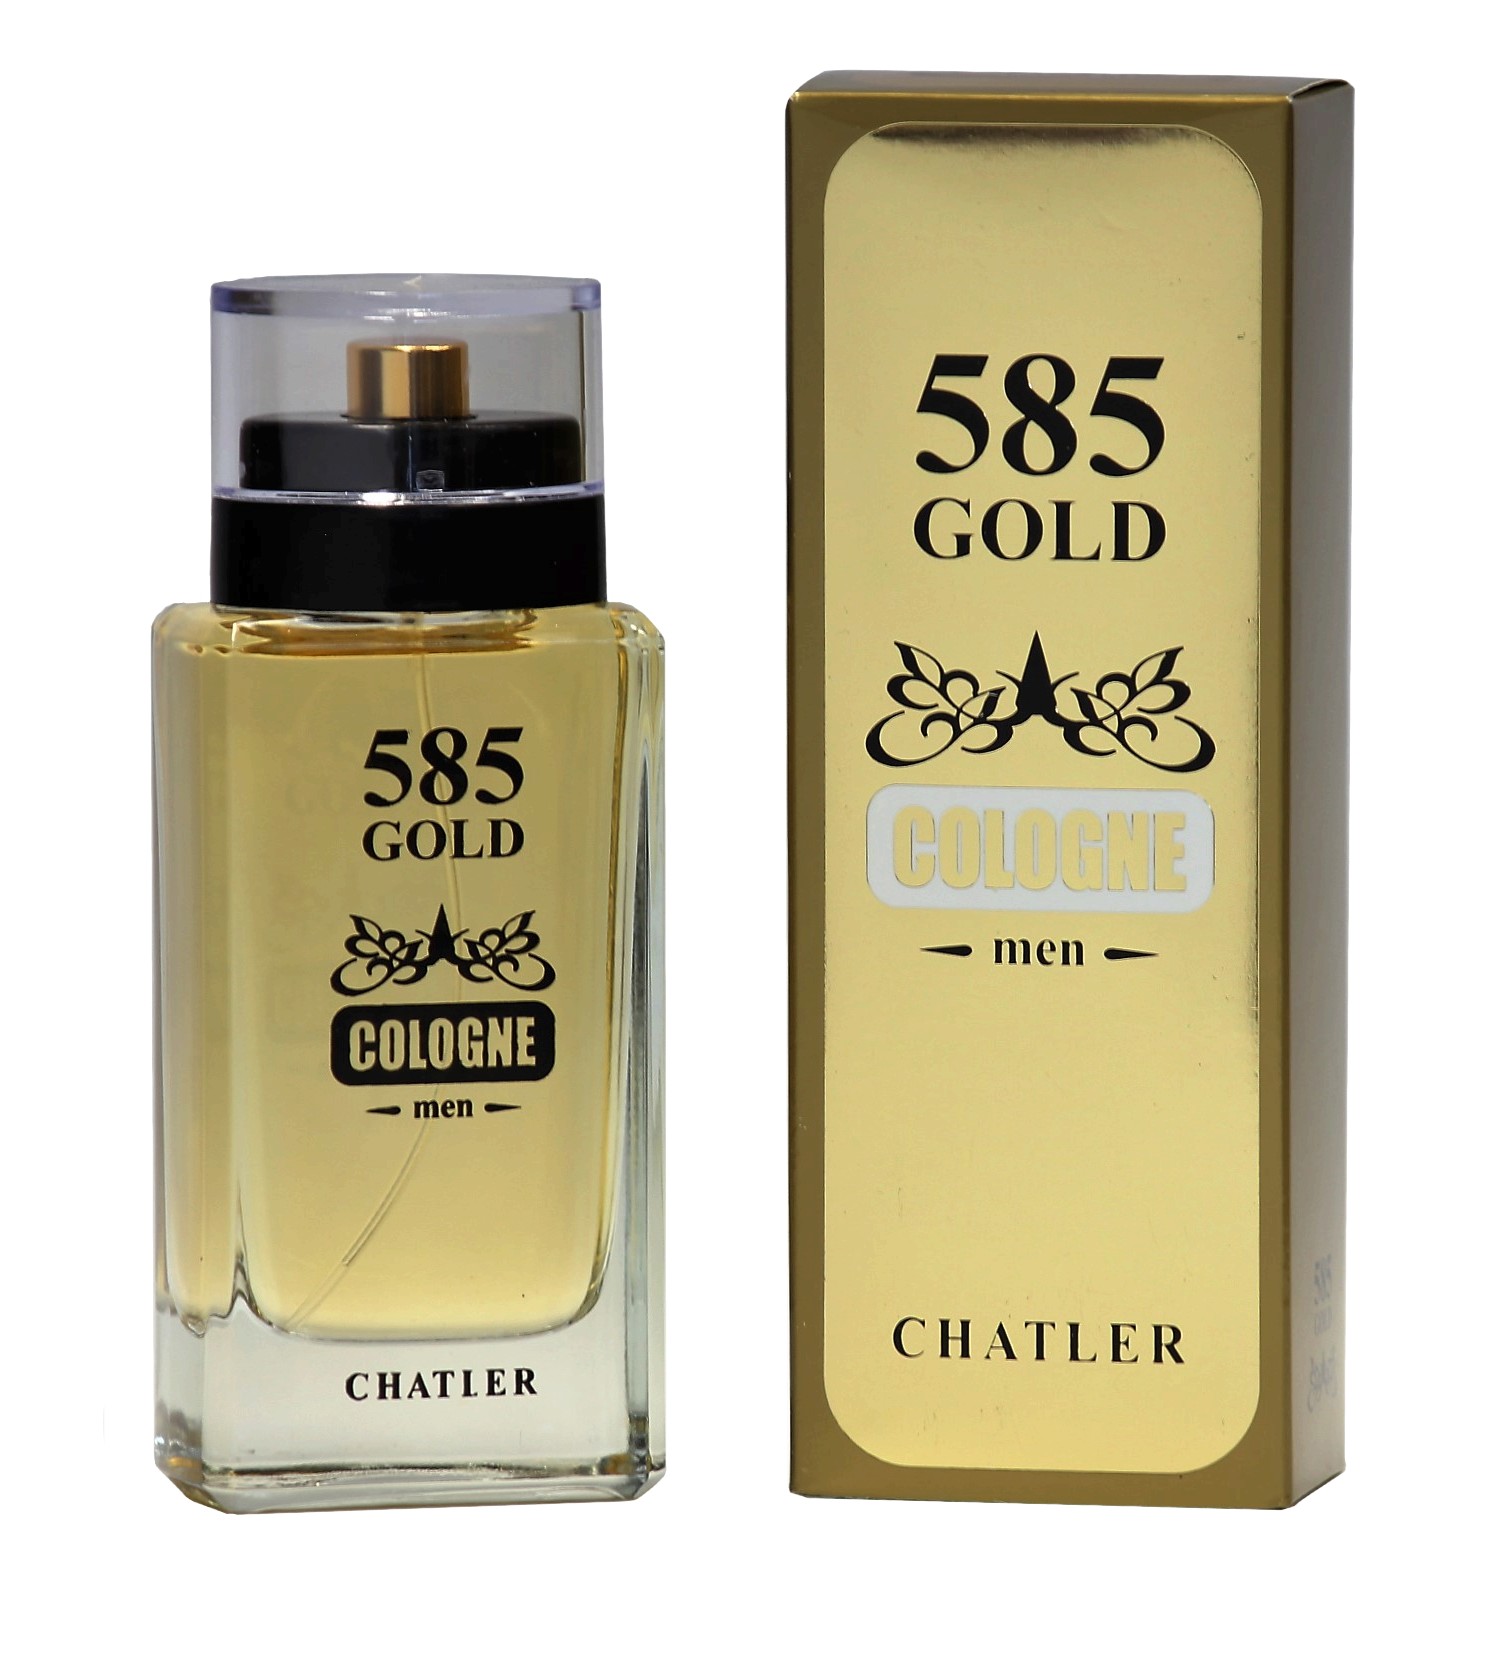 Euro Scents sauvag Gold духи. Euro Scents sauvag Gold. Chatler. Pure homme